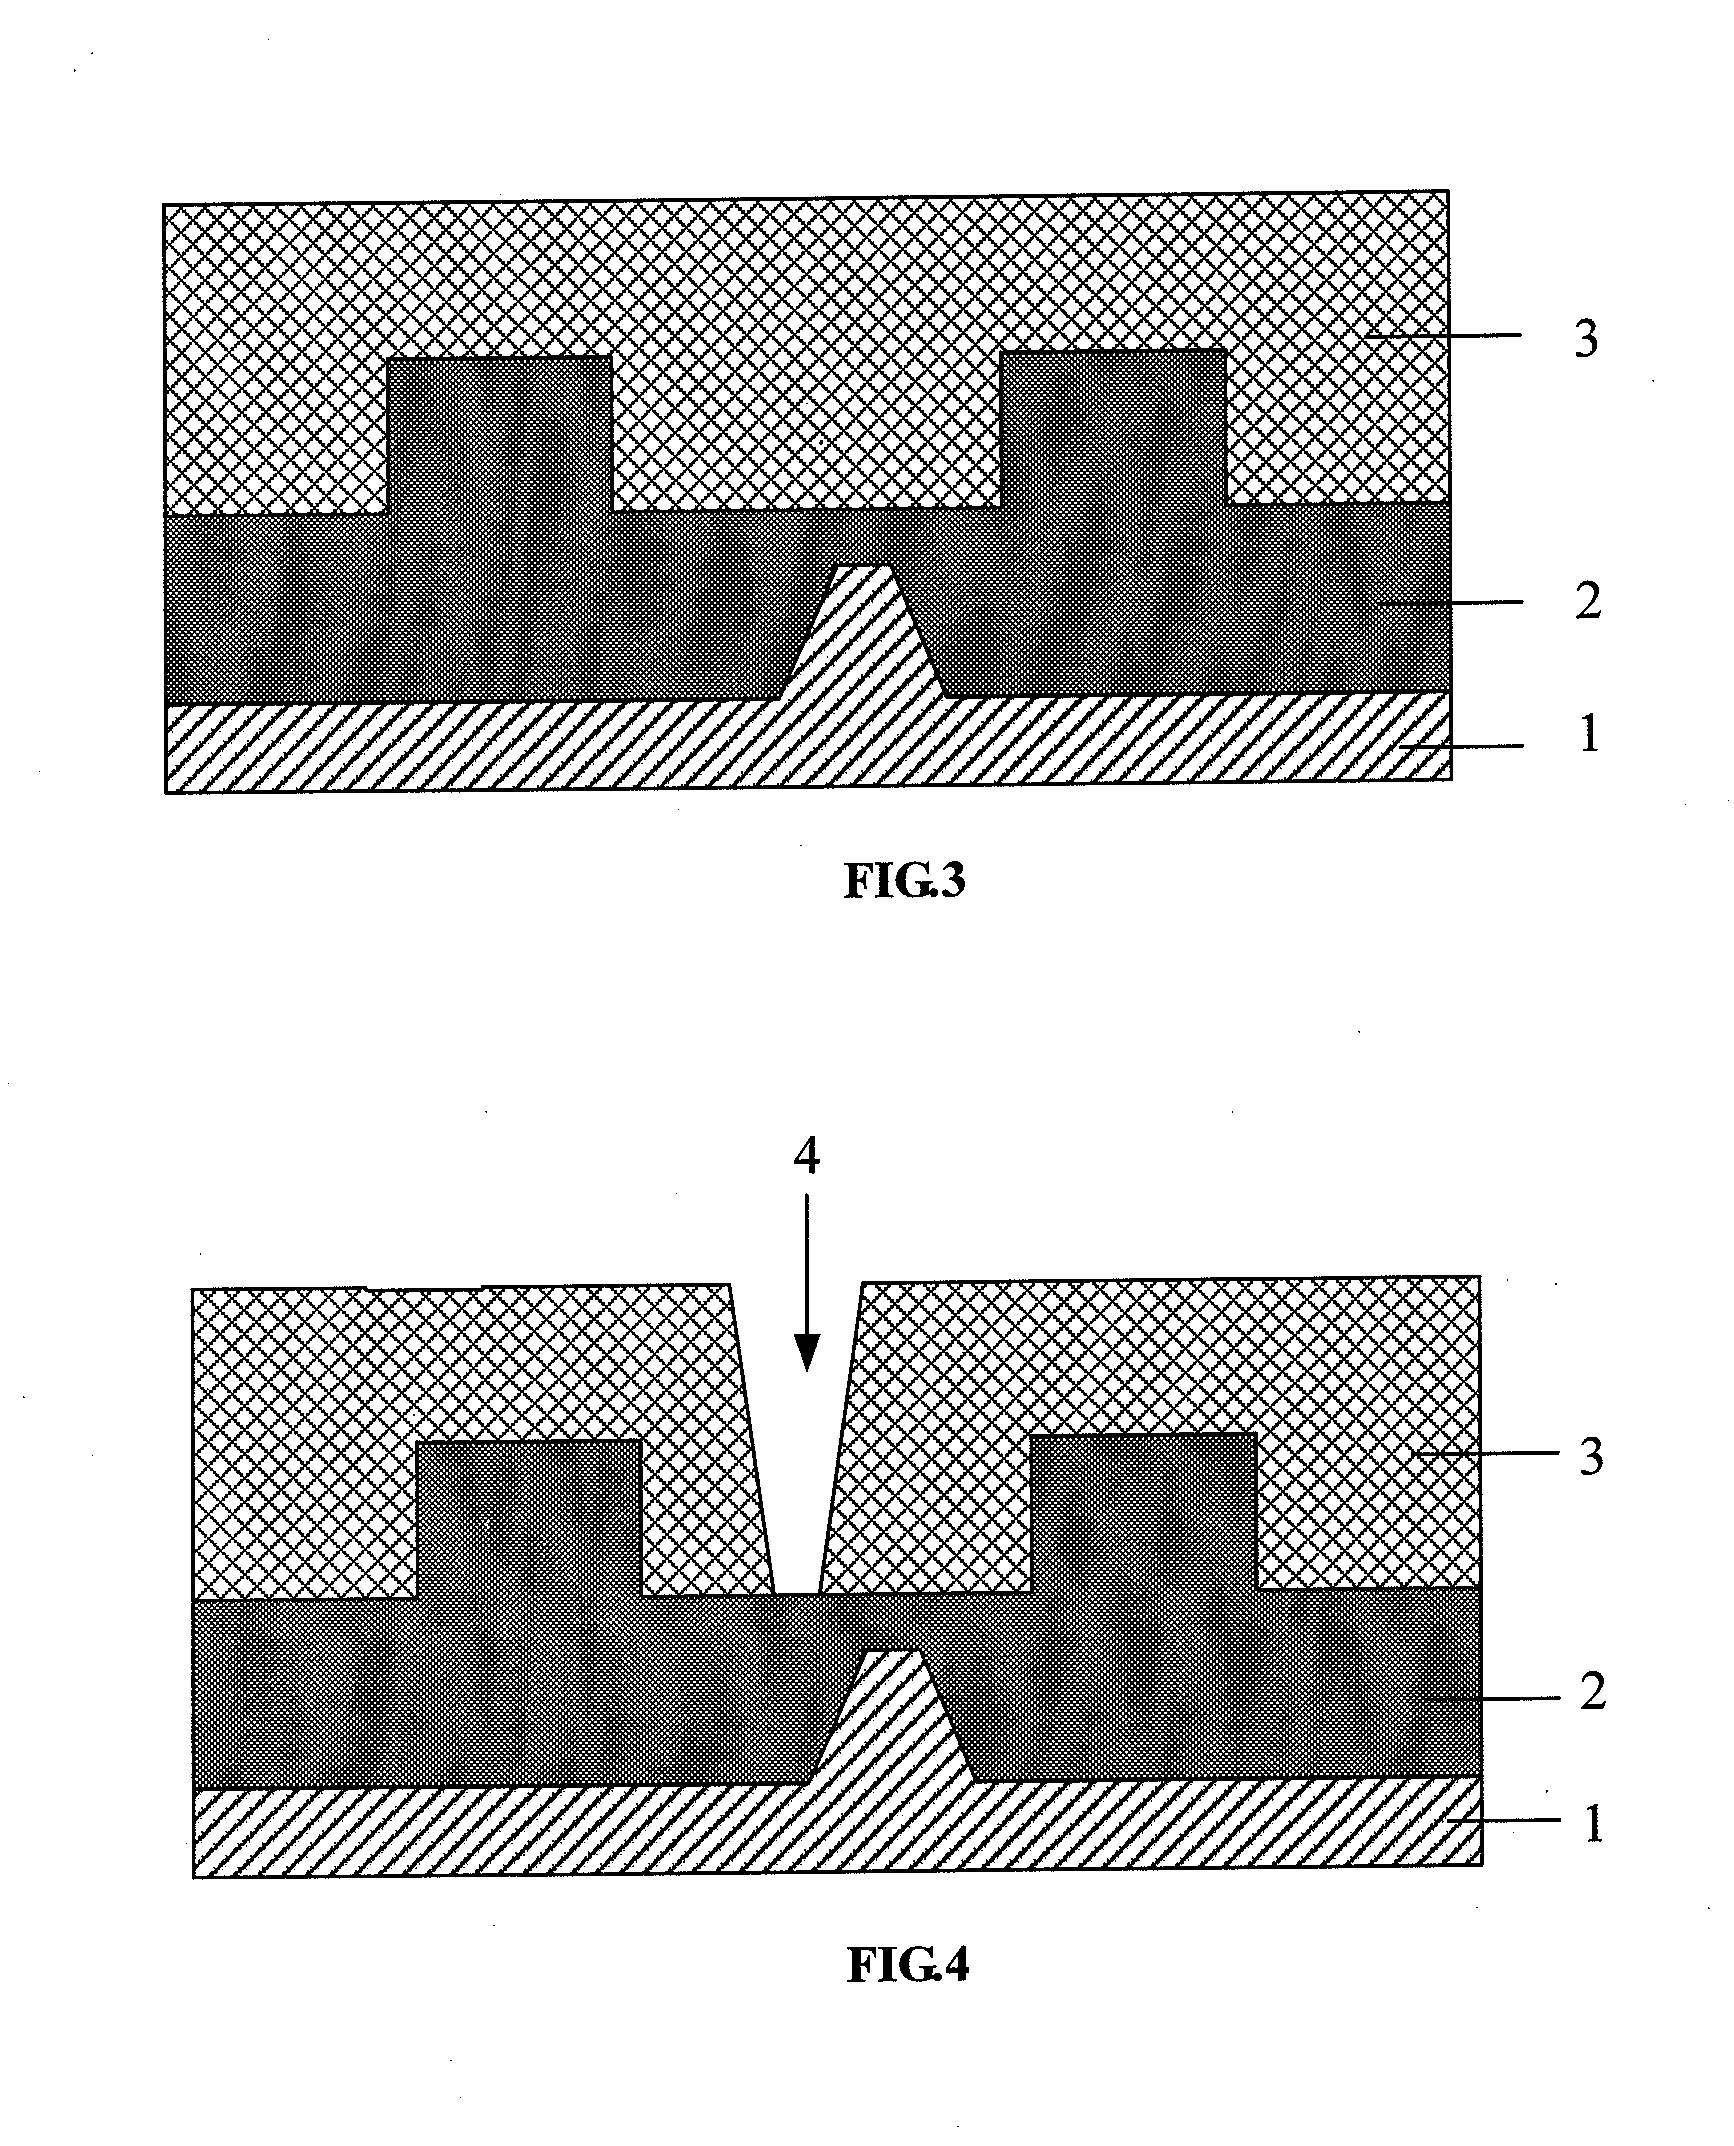 Fabrication method for improving surface planarity after tungsten chemical mechanical polishing